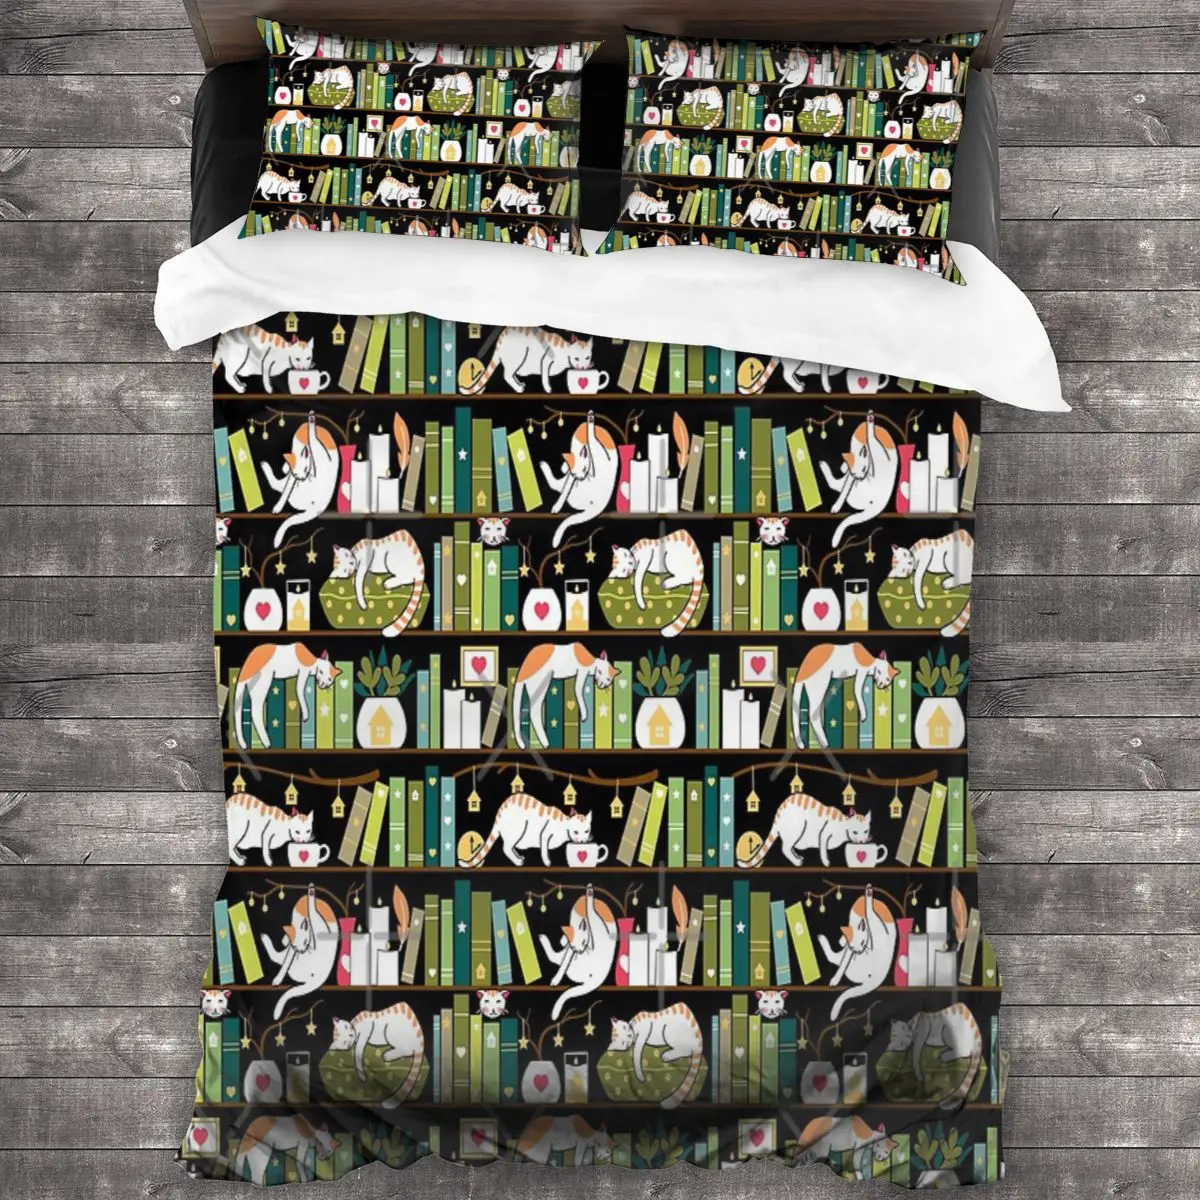 

Library Cats - Whimsical Cats Linens Bedspread Bedding Set Duvet Cover Plaid Quilt Cover 90 Bed Linen Calico